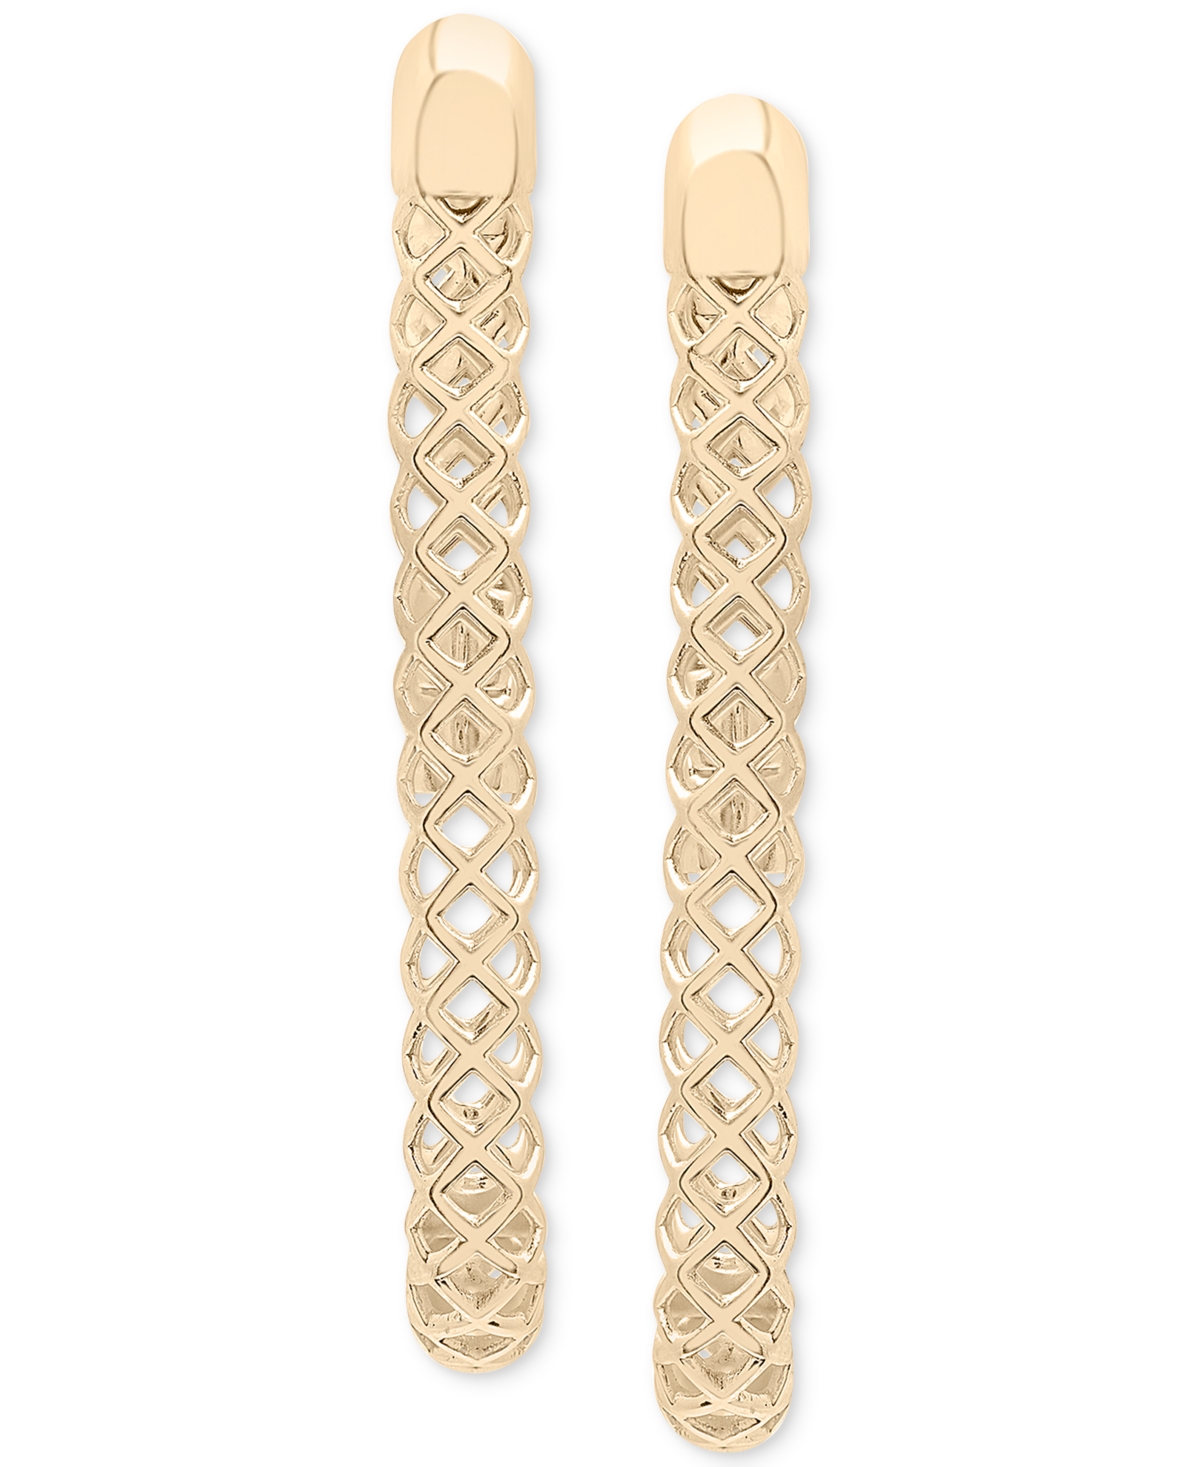 Shop Audrey By Aurate Lattice Rectangular Hoop Earrings In Gold Vermeil, Created For Macy's